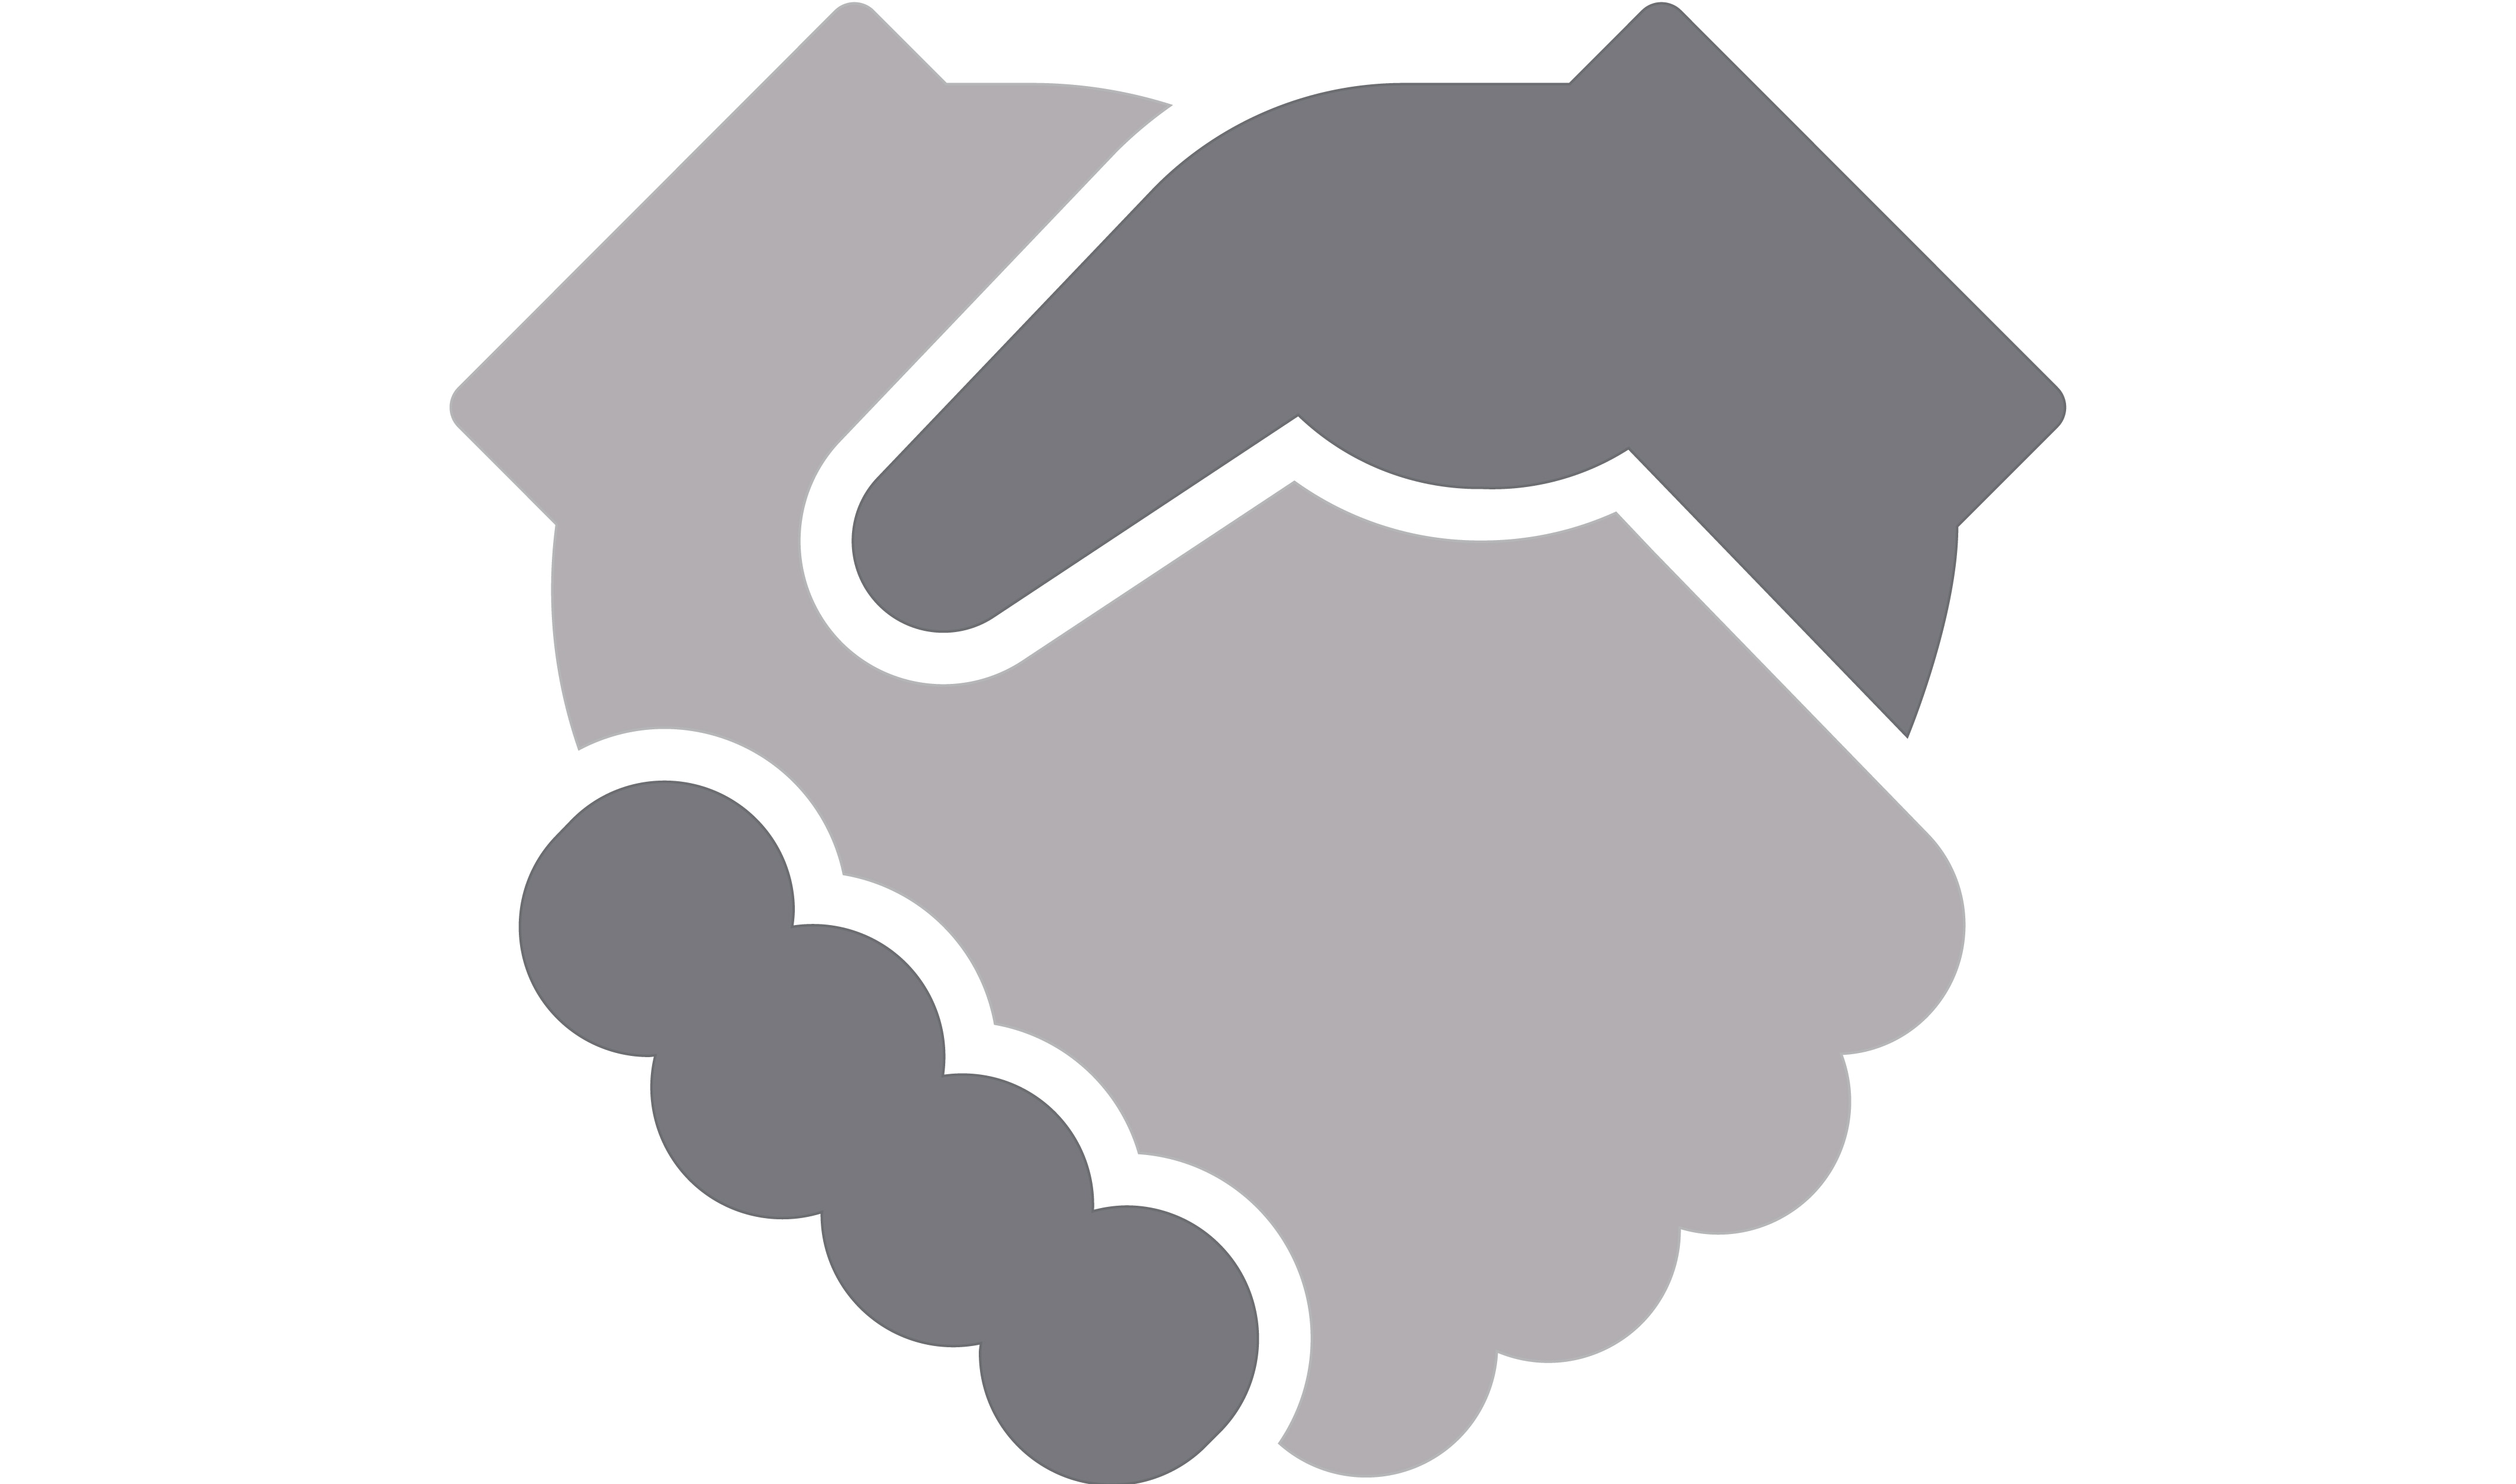 An icon of 2 hands clasping, shaking hands